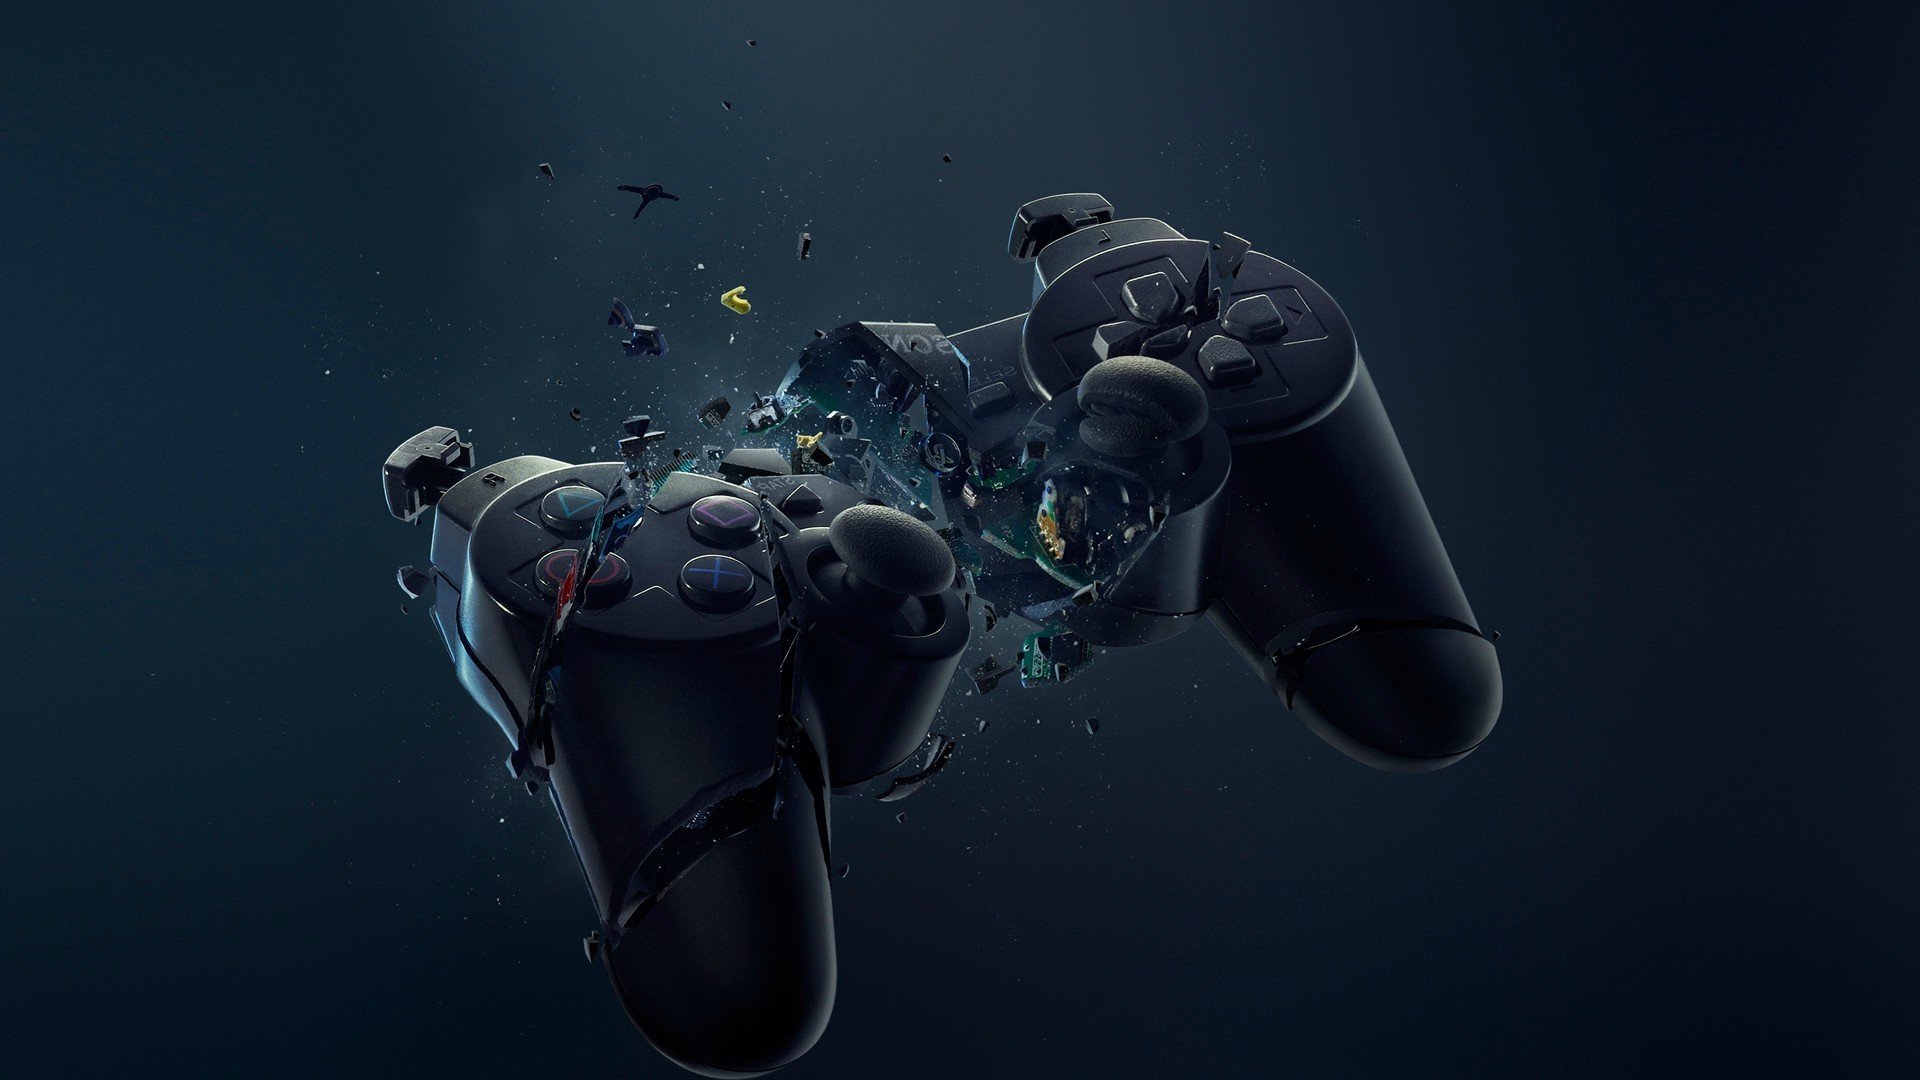 manet ps4 wallpeiper  Gaming wallpapers, Cool wallpaper, Video game  backgrounds